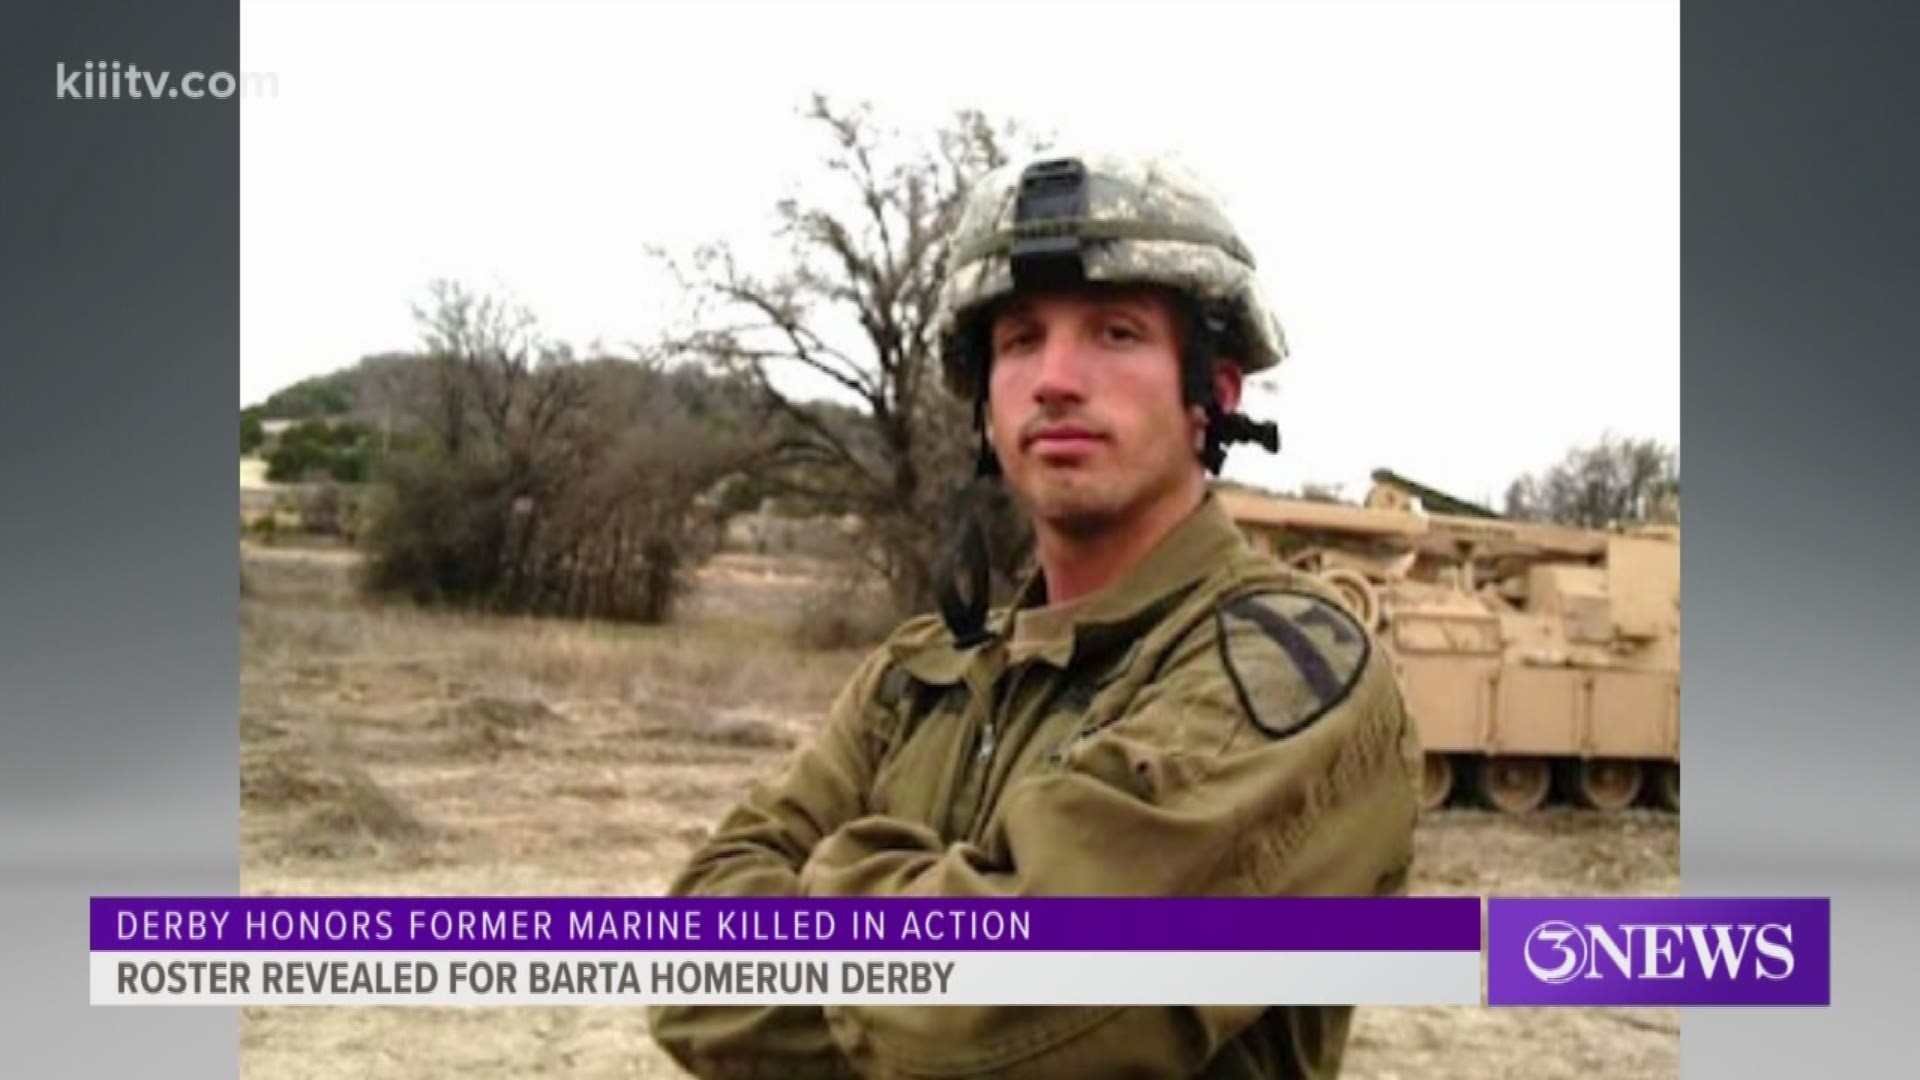 This is the sixth year the high school homerun derby will be held in honor of the former Flour Bluff Hornet and marine John Paul Barta who was killed in Iraq in 2006.